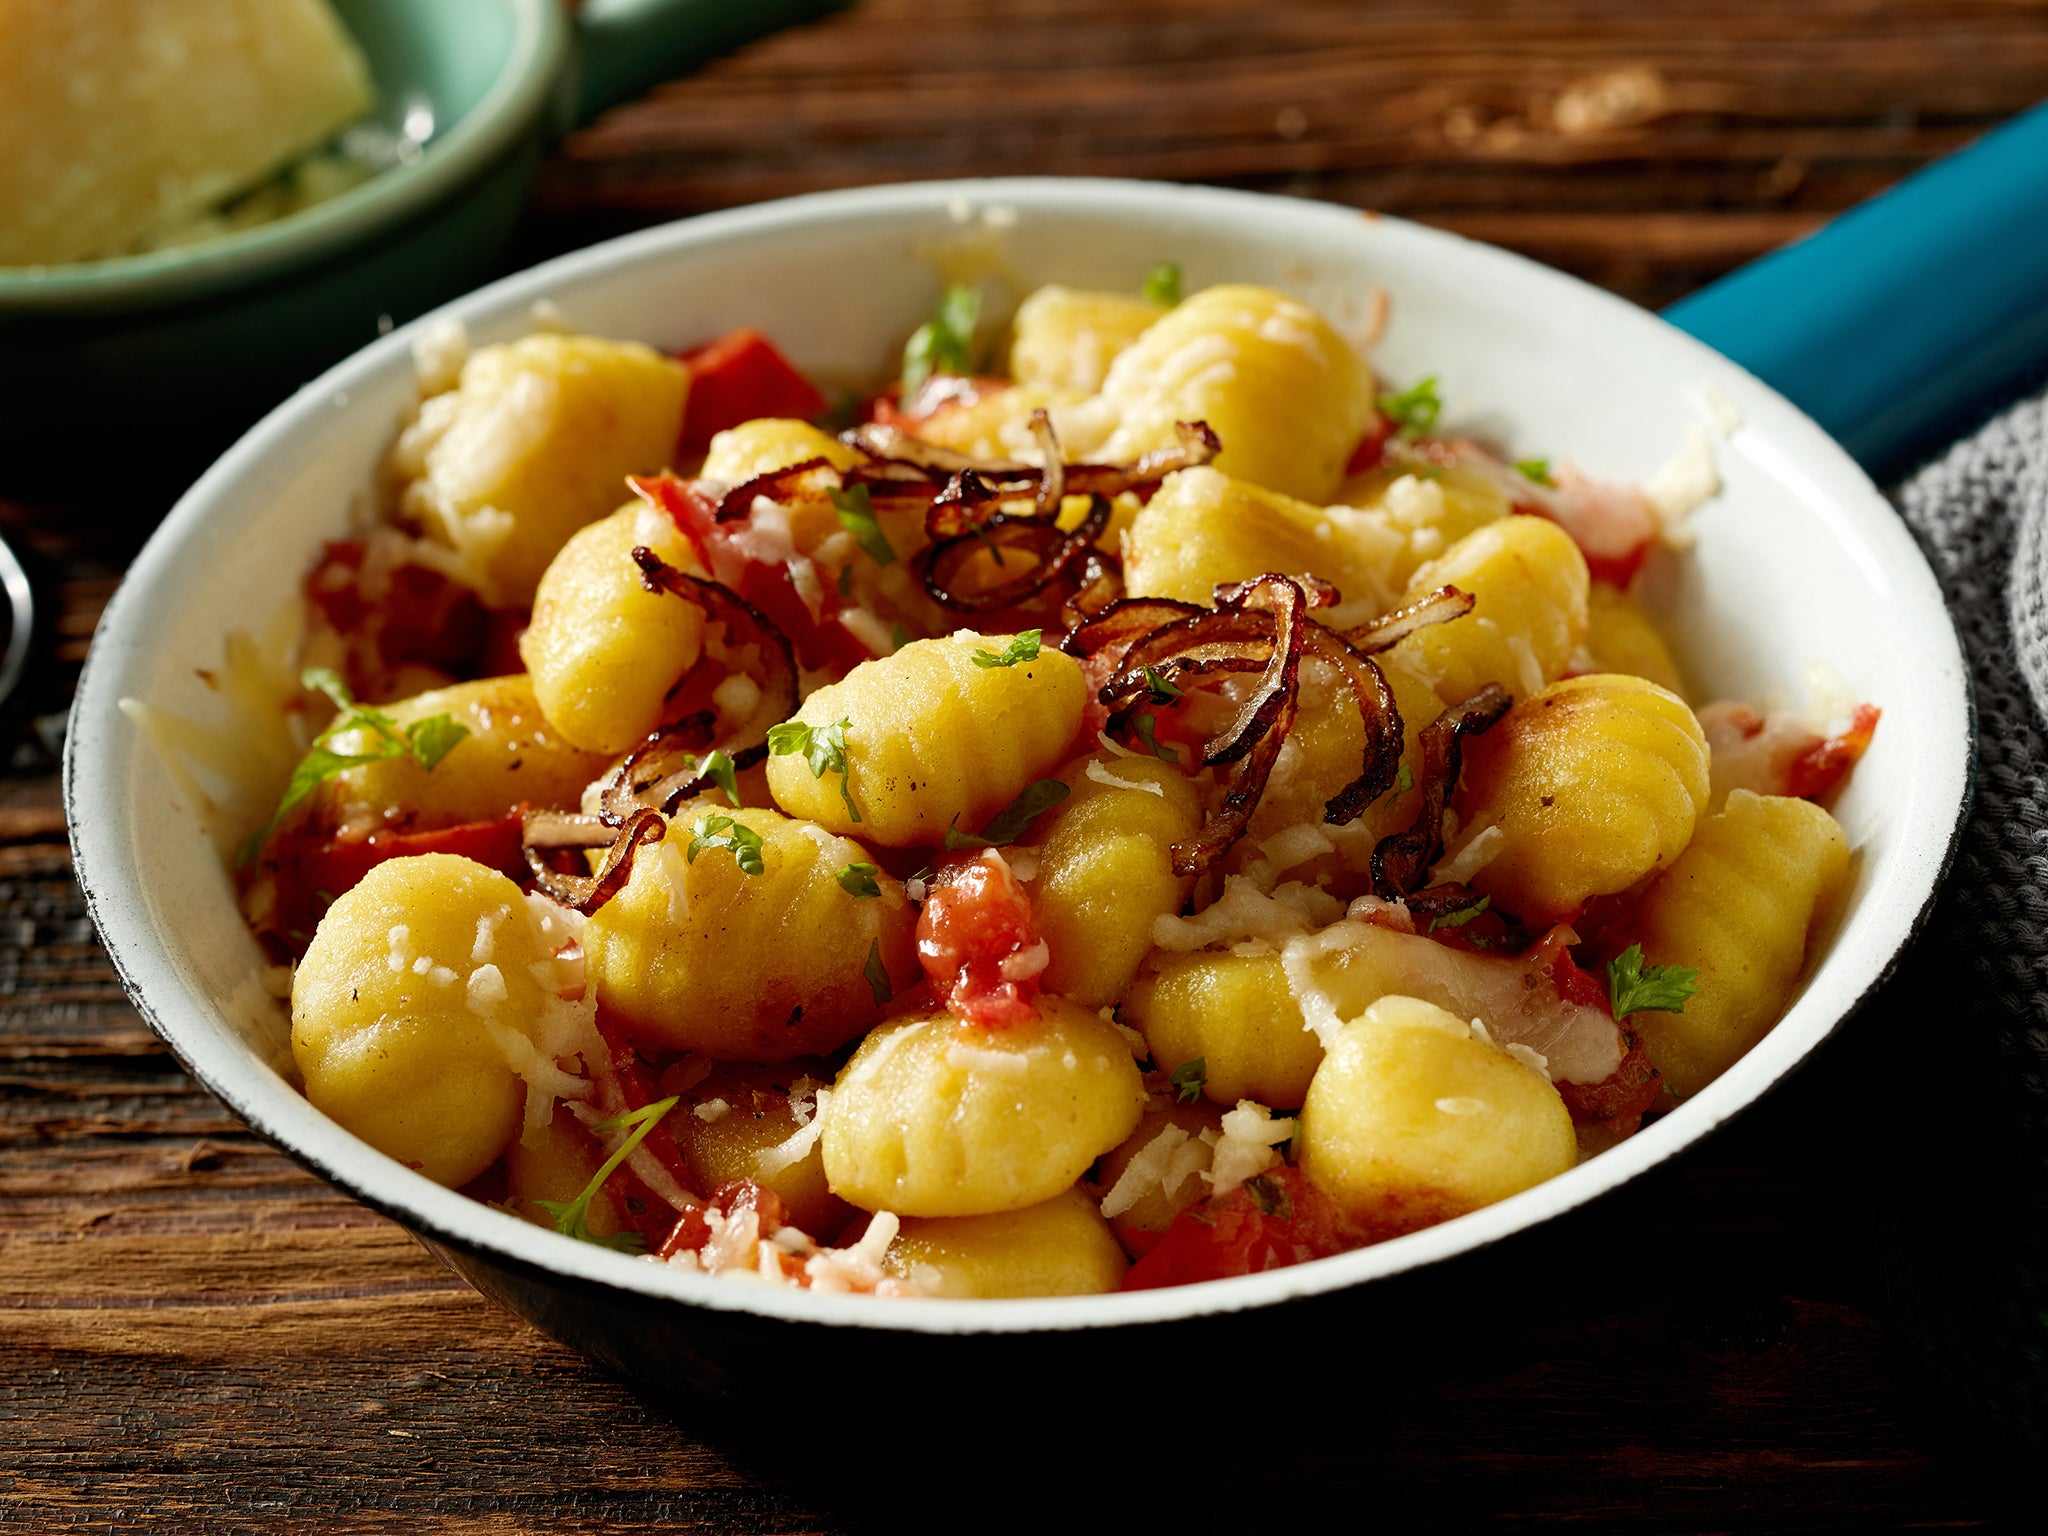 This crispy gnocchi dish is inspired by the beloved Tuscan panzanella salad